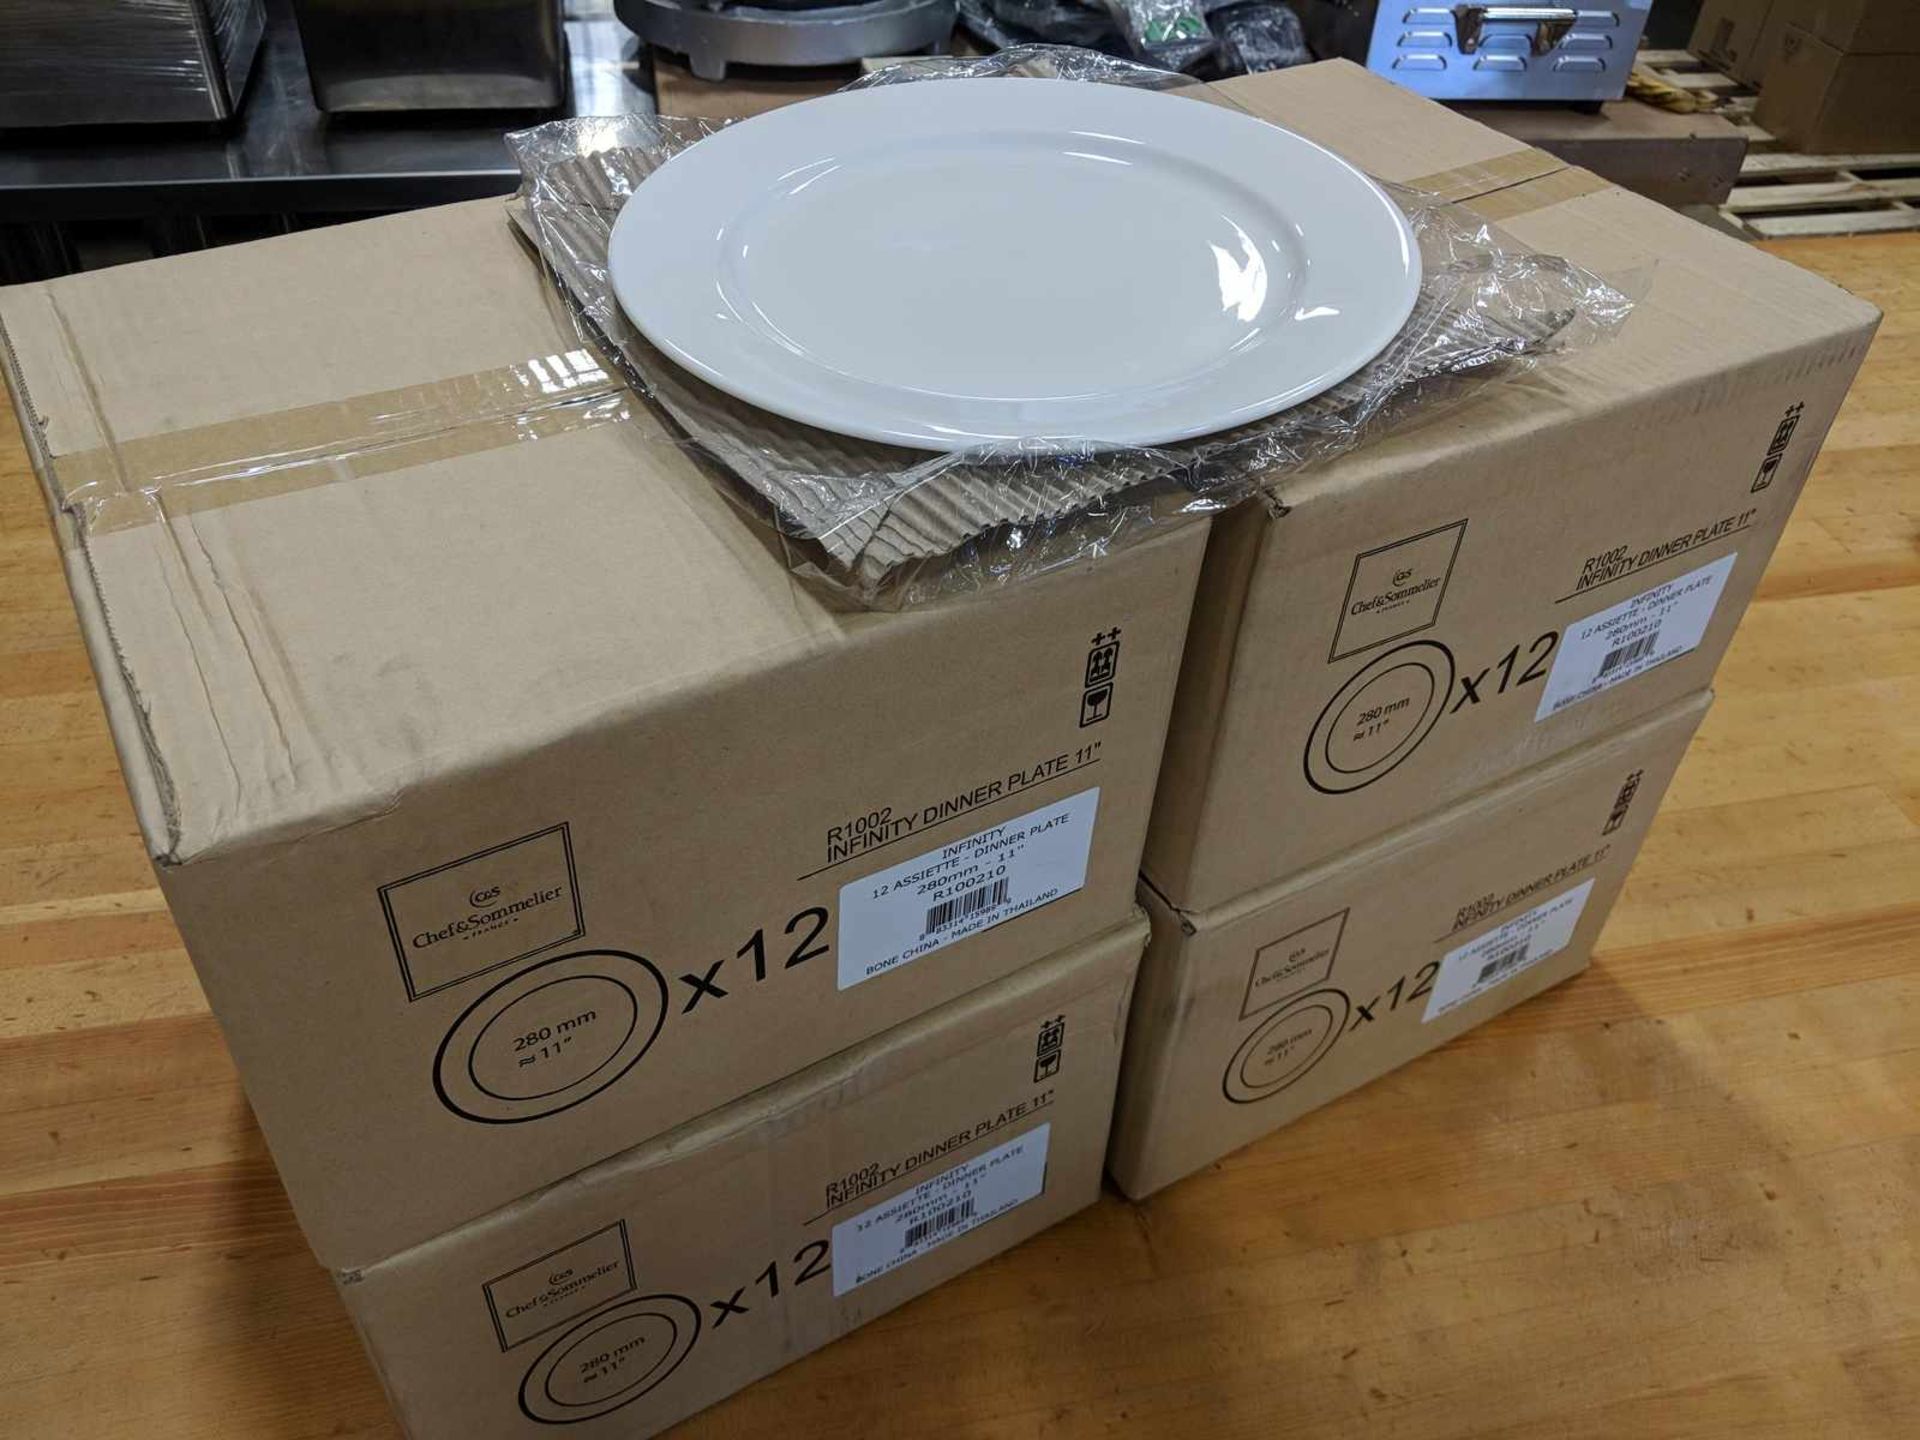 11" Infinity Dinner Plates - Lot of 48 (4 Cases), Arcoroc R1004